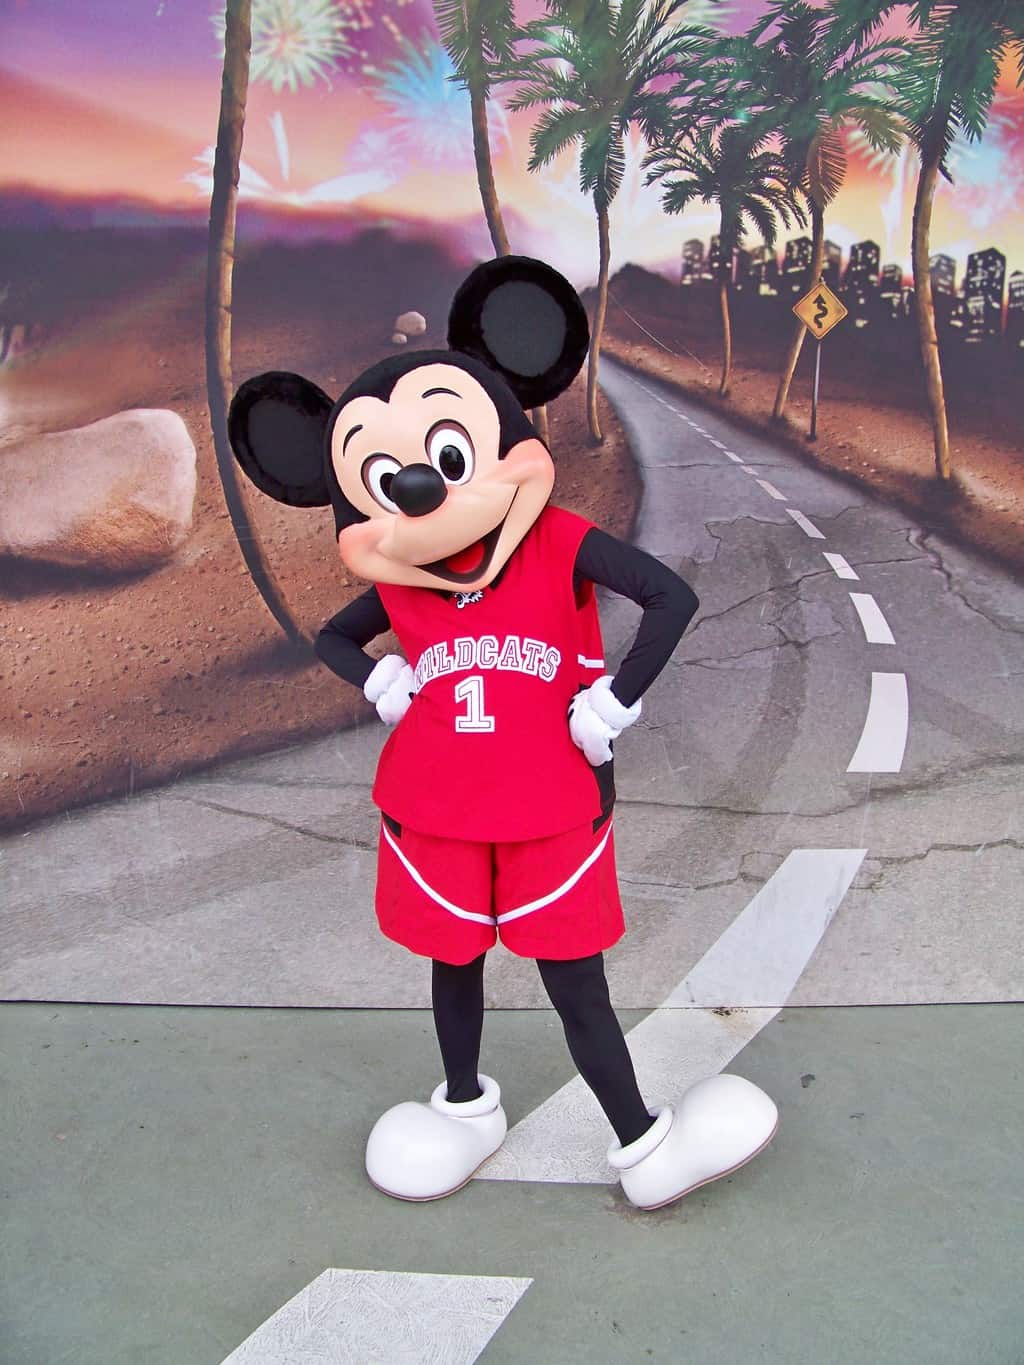 Mickey showing his support for the Wildcats from High School Musical at the Walt Disney Studios in 2009.